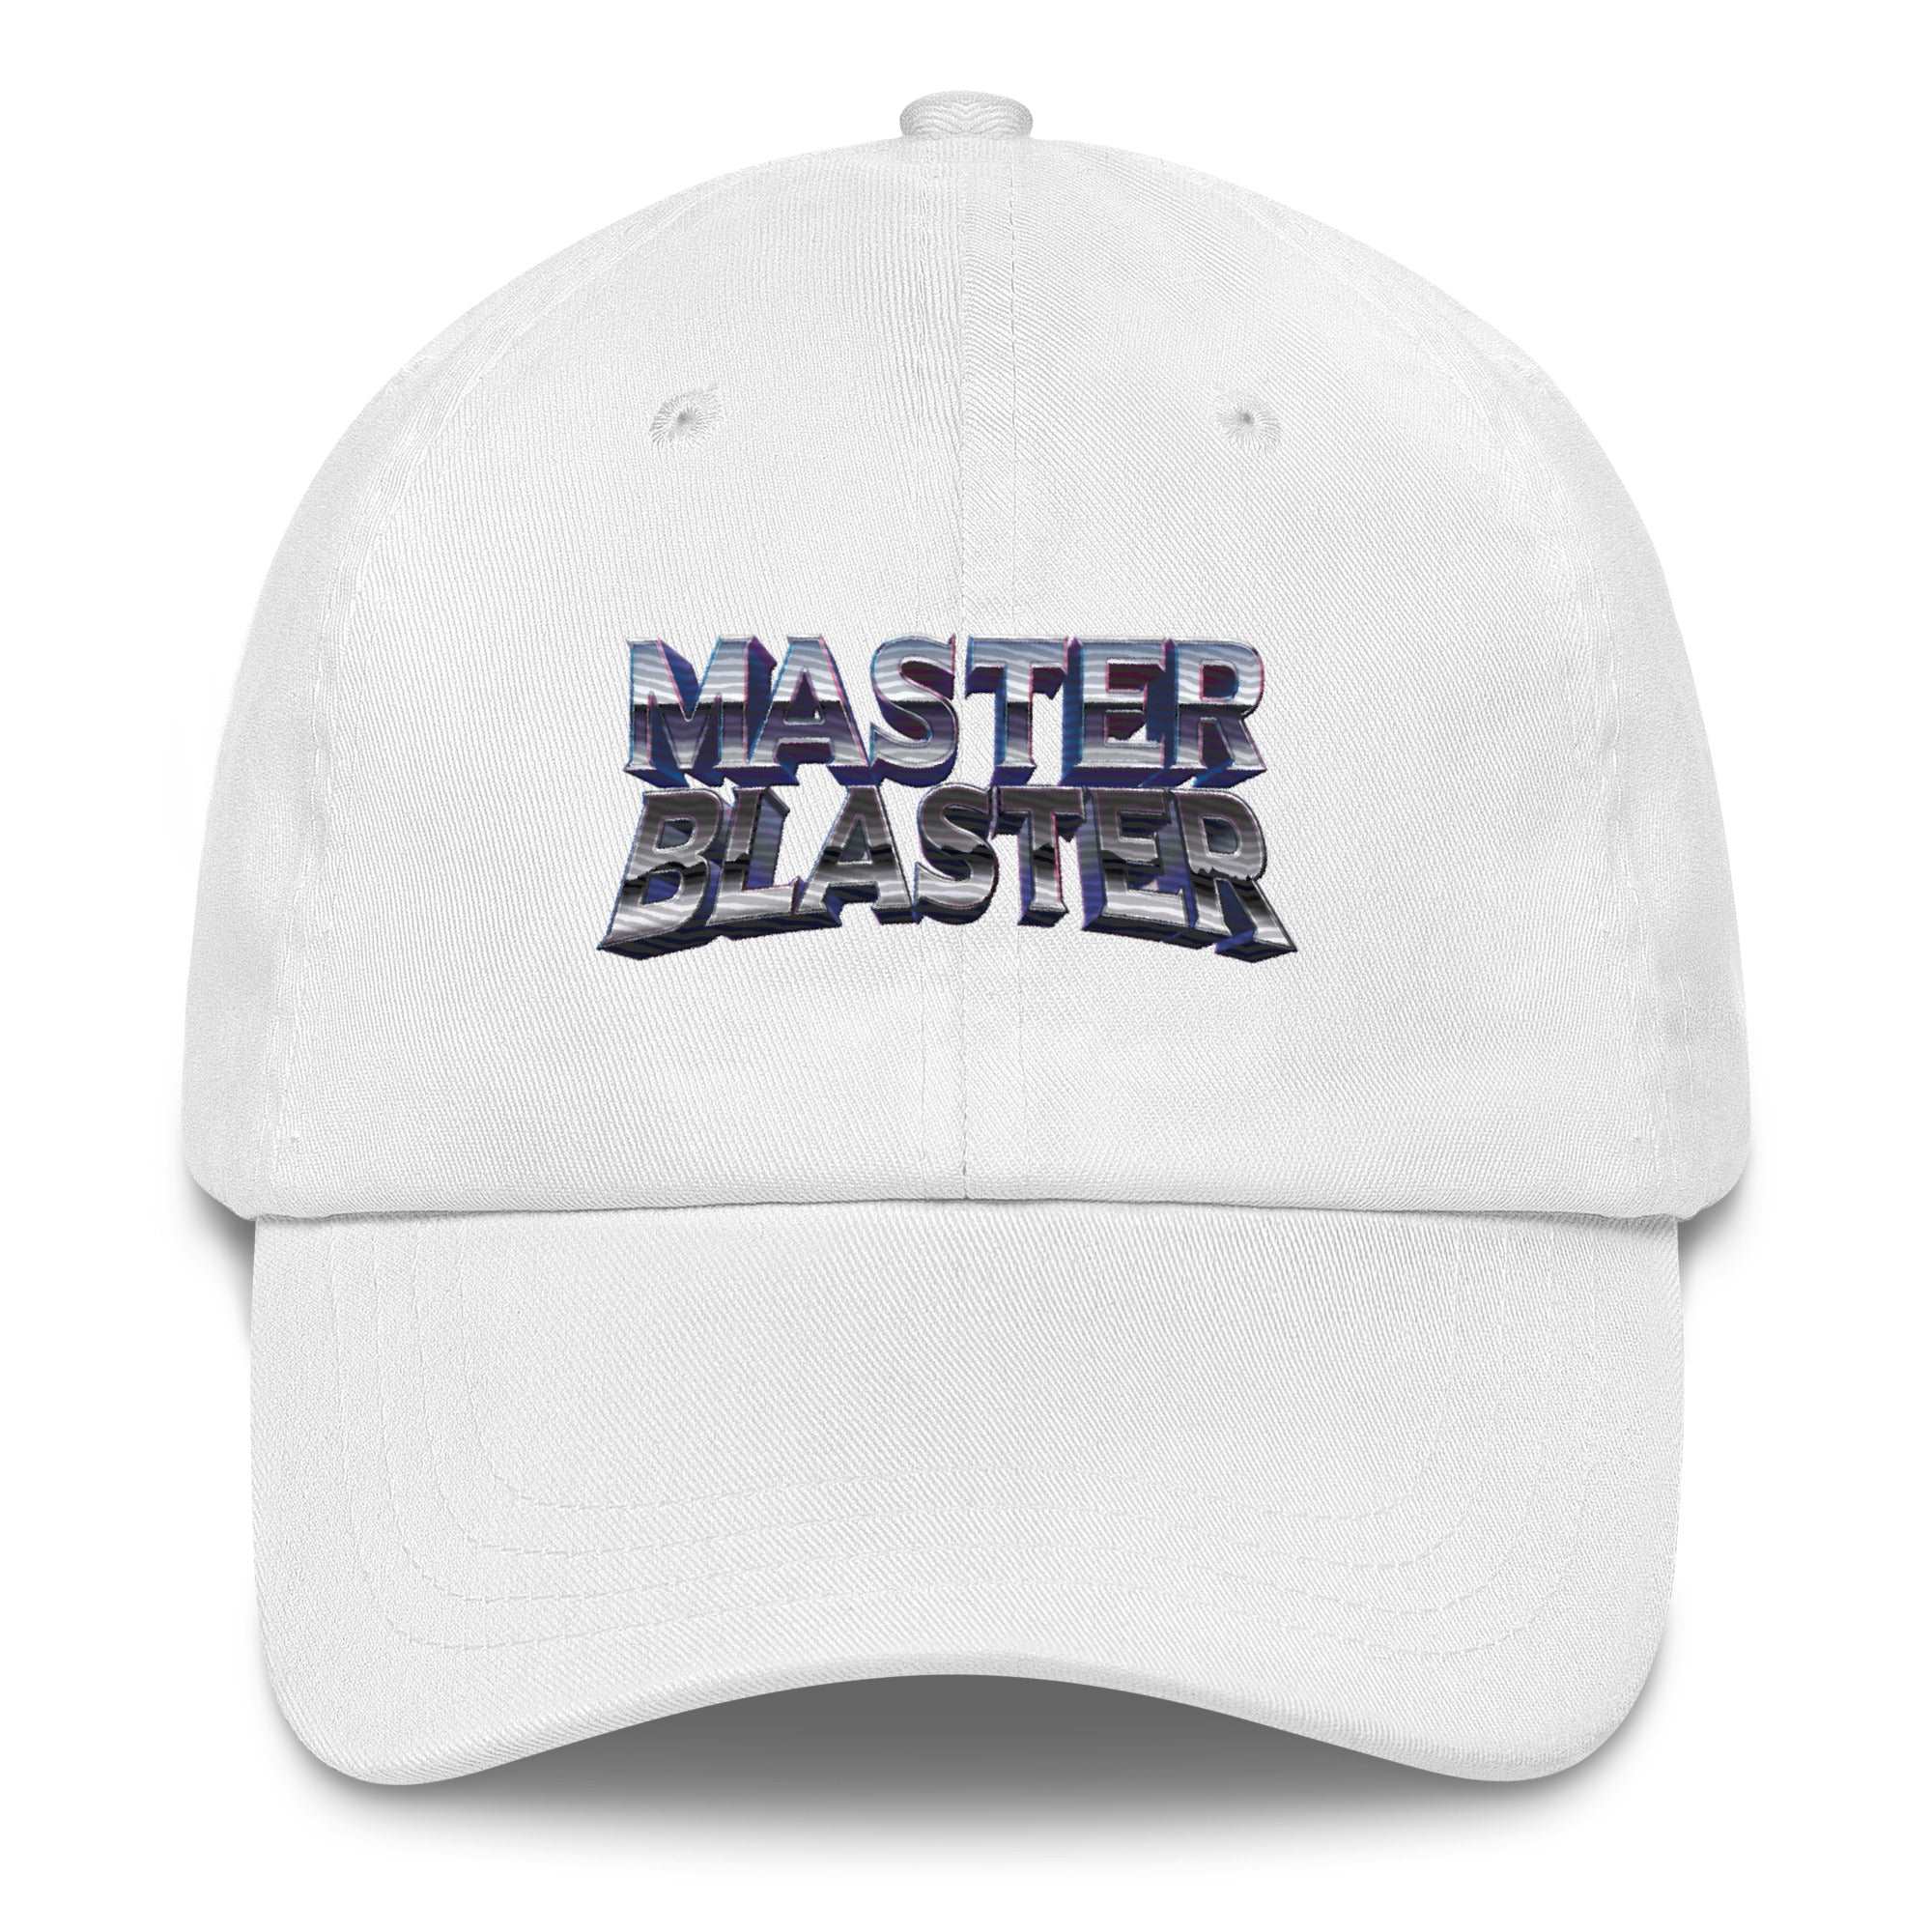 a black hat with the word master blaster printed on it